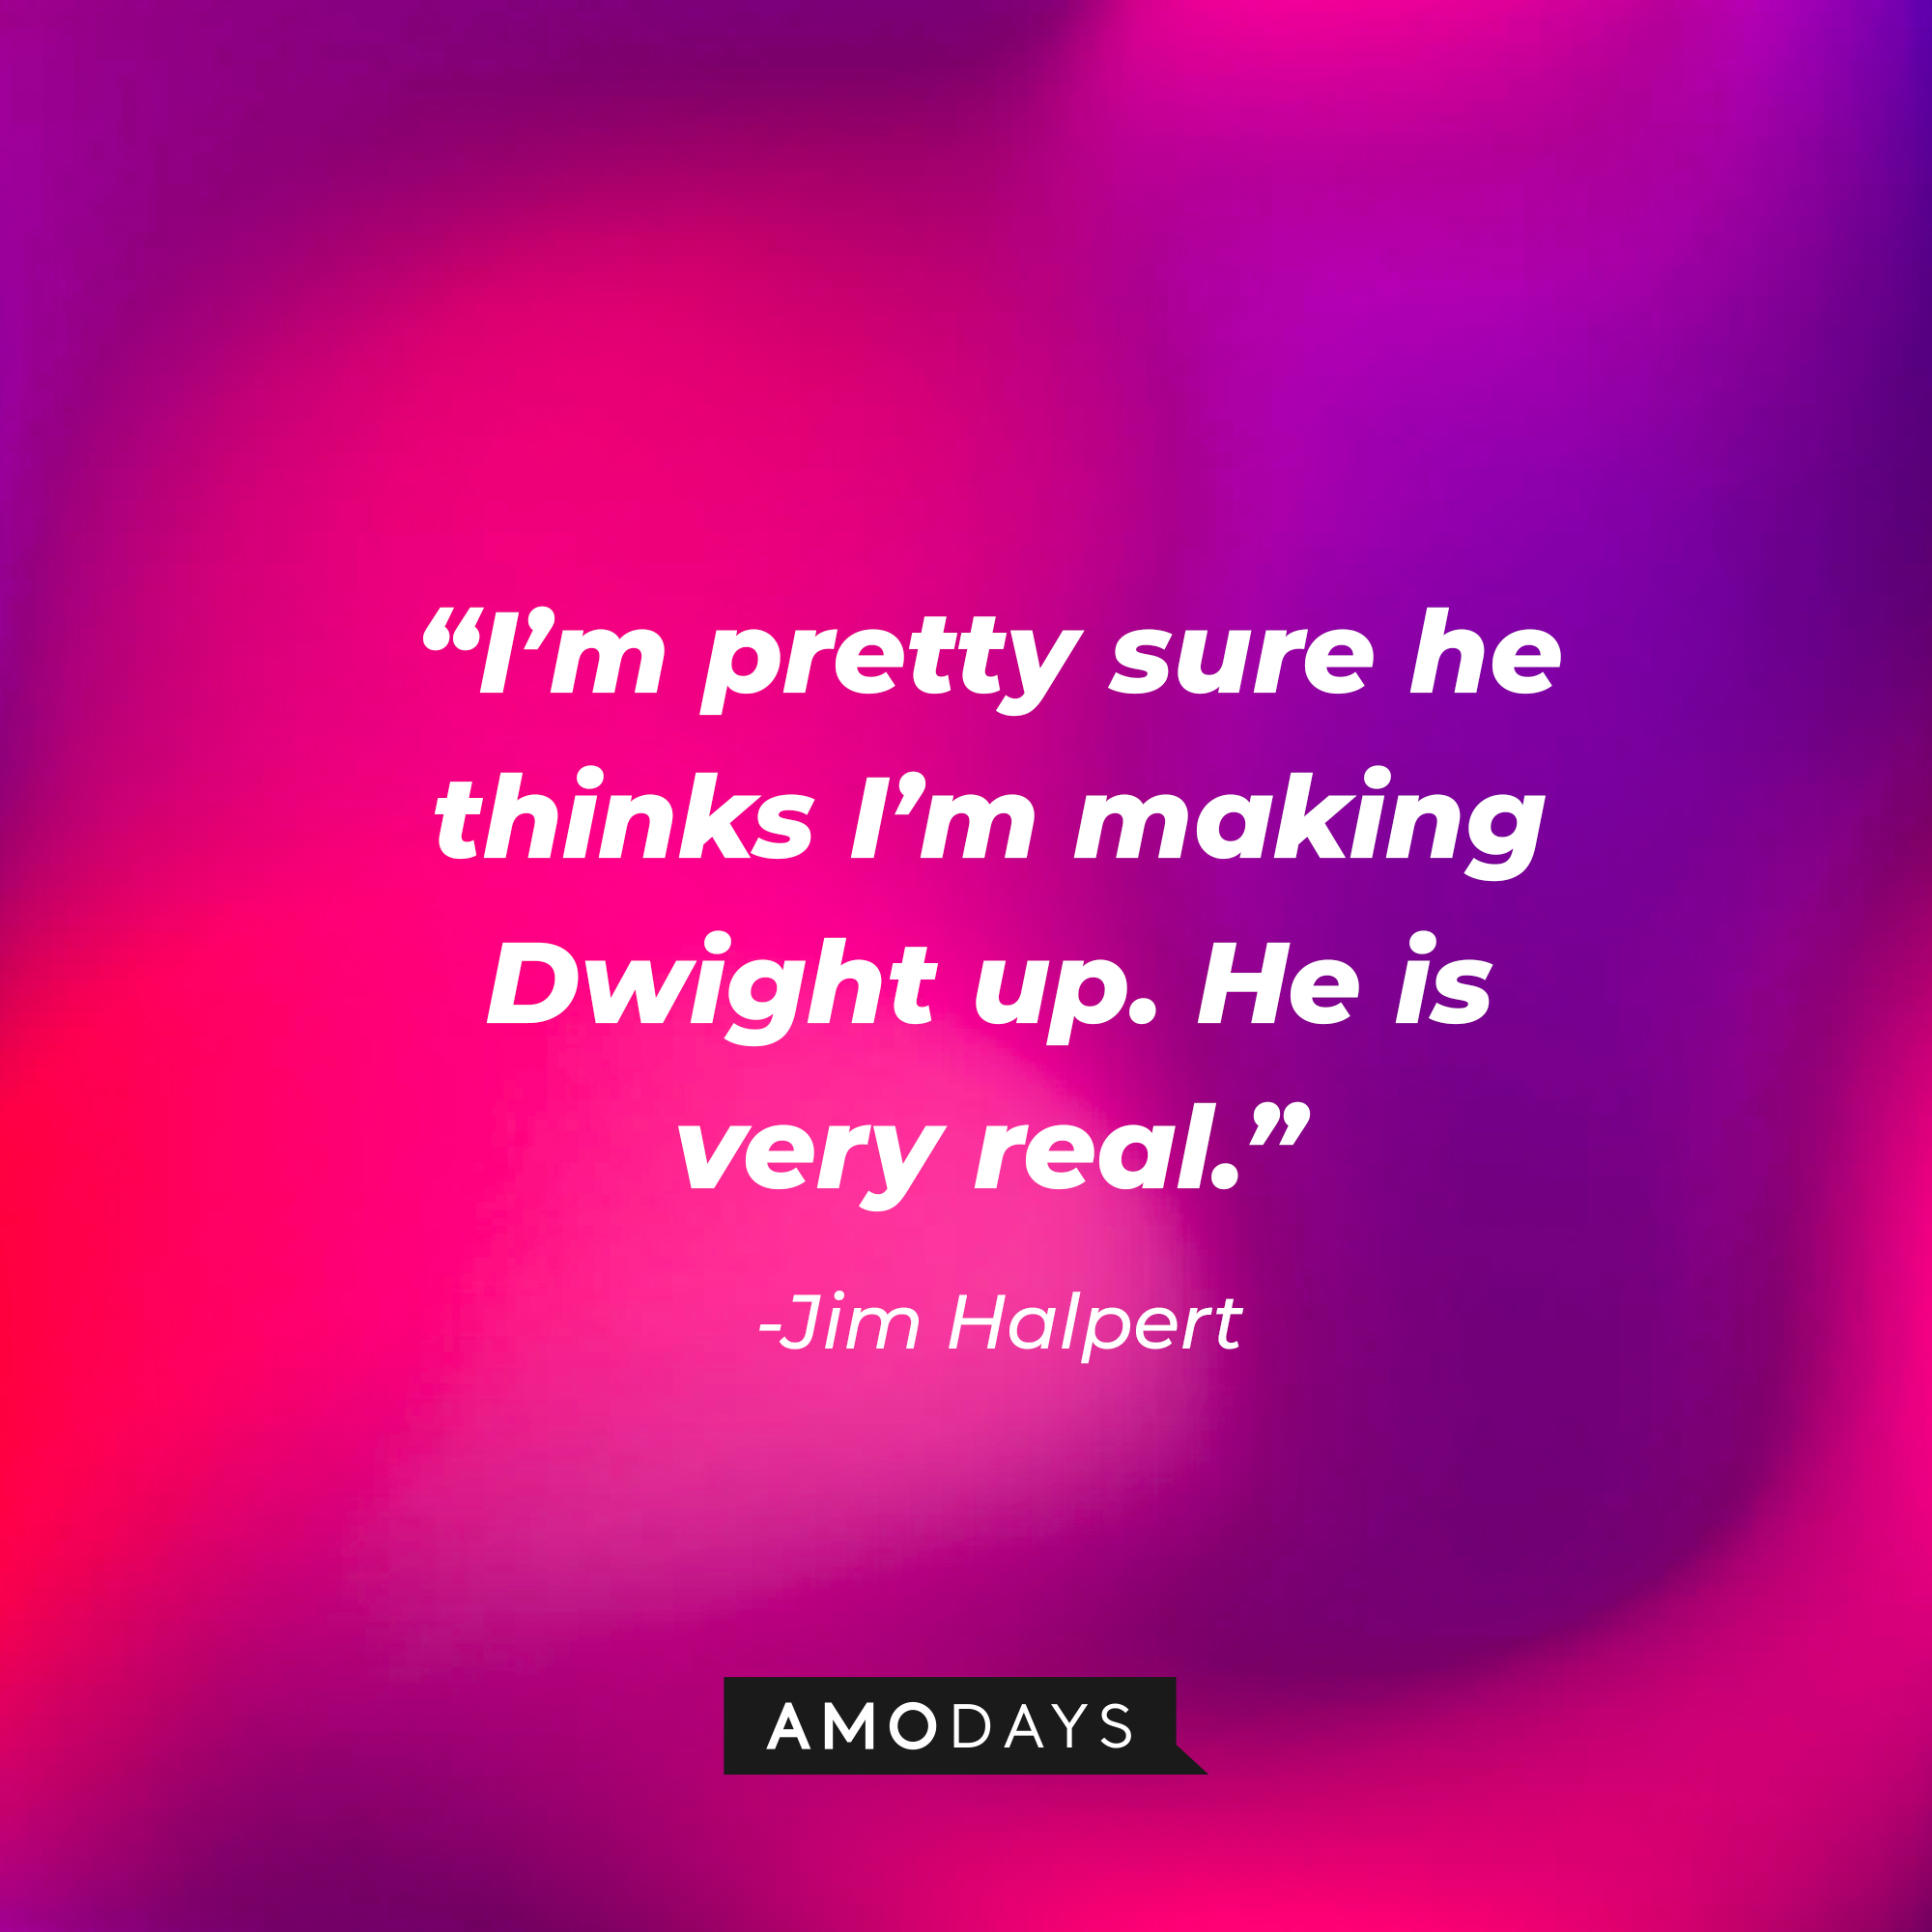 Jim Halpert’s quote: "I’m pretty sure he thinks I’m making Dwight up. He is very real.” | Source: AmoDays